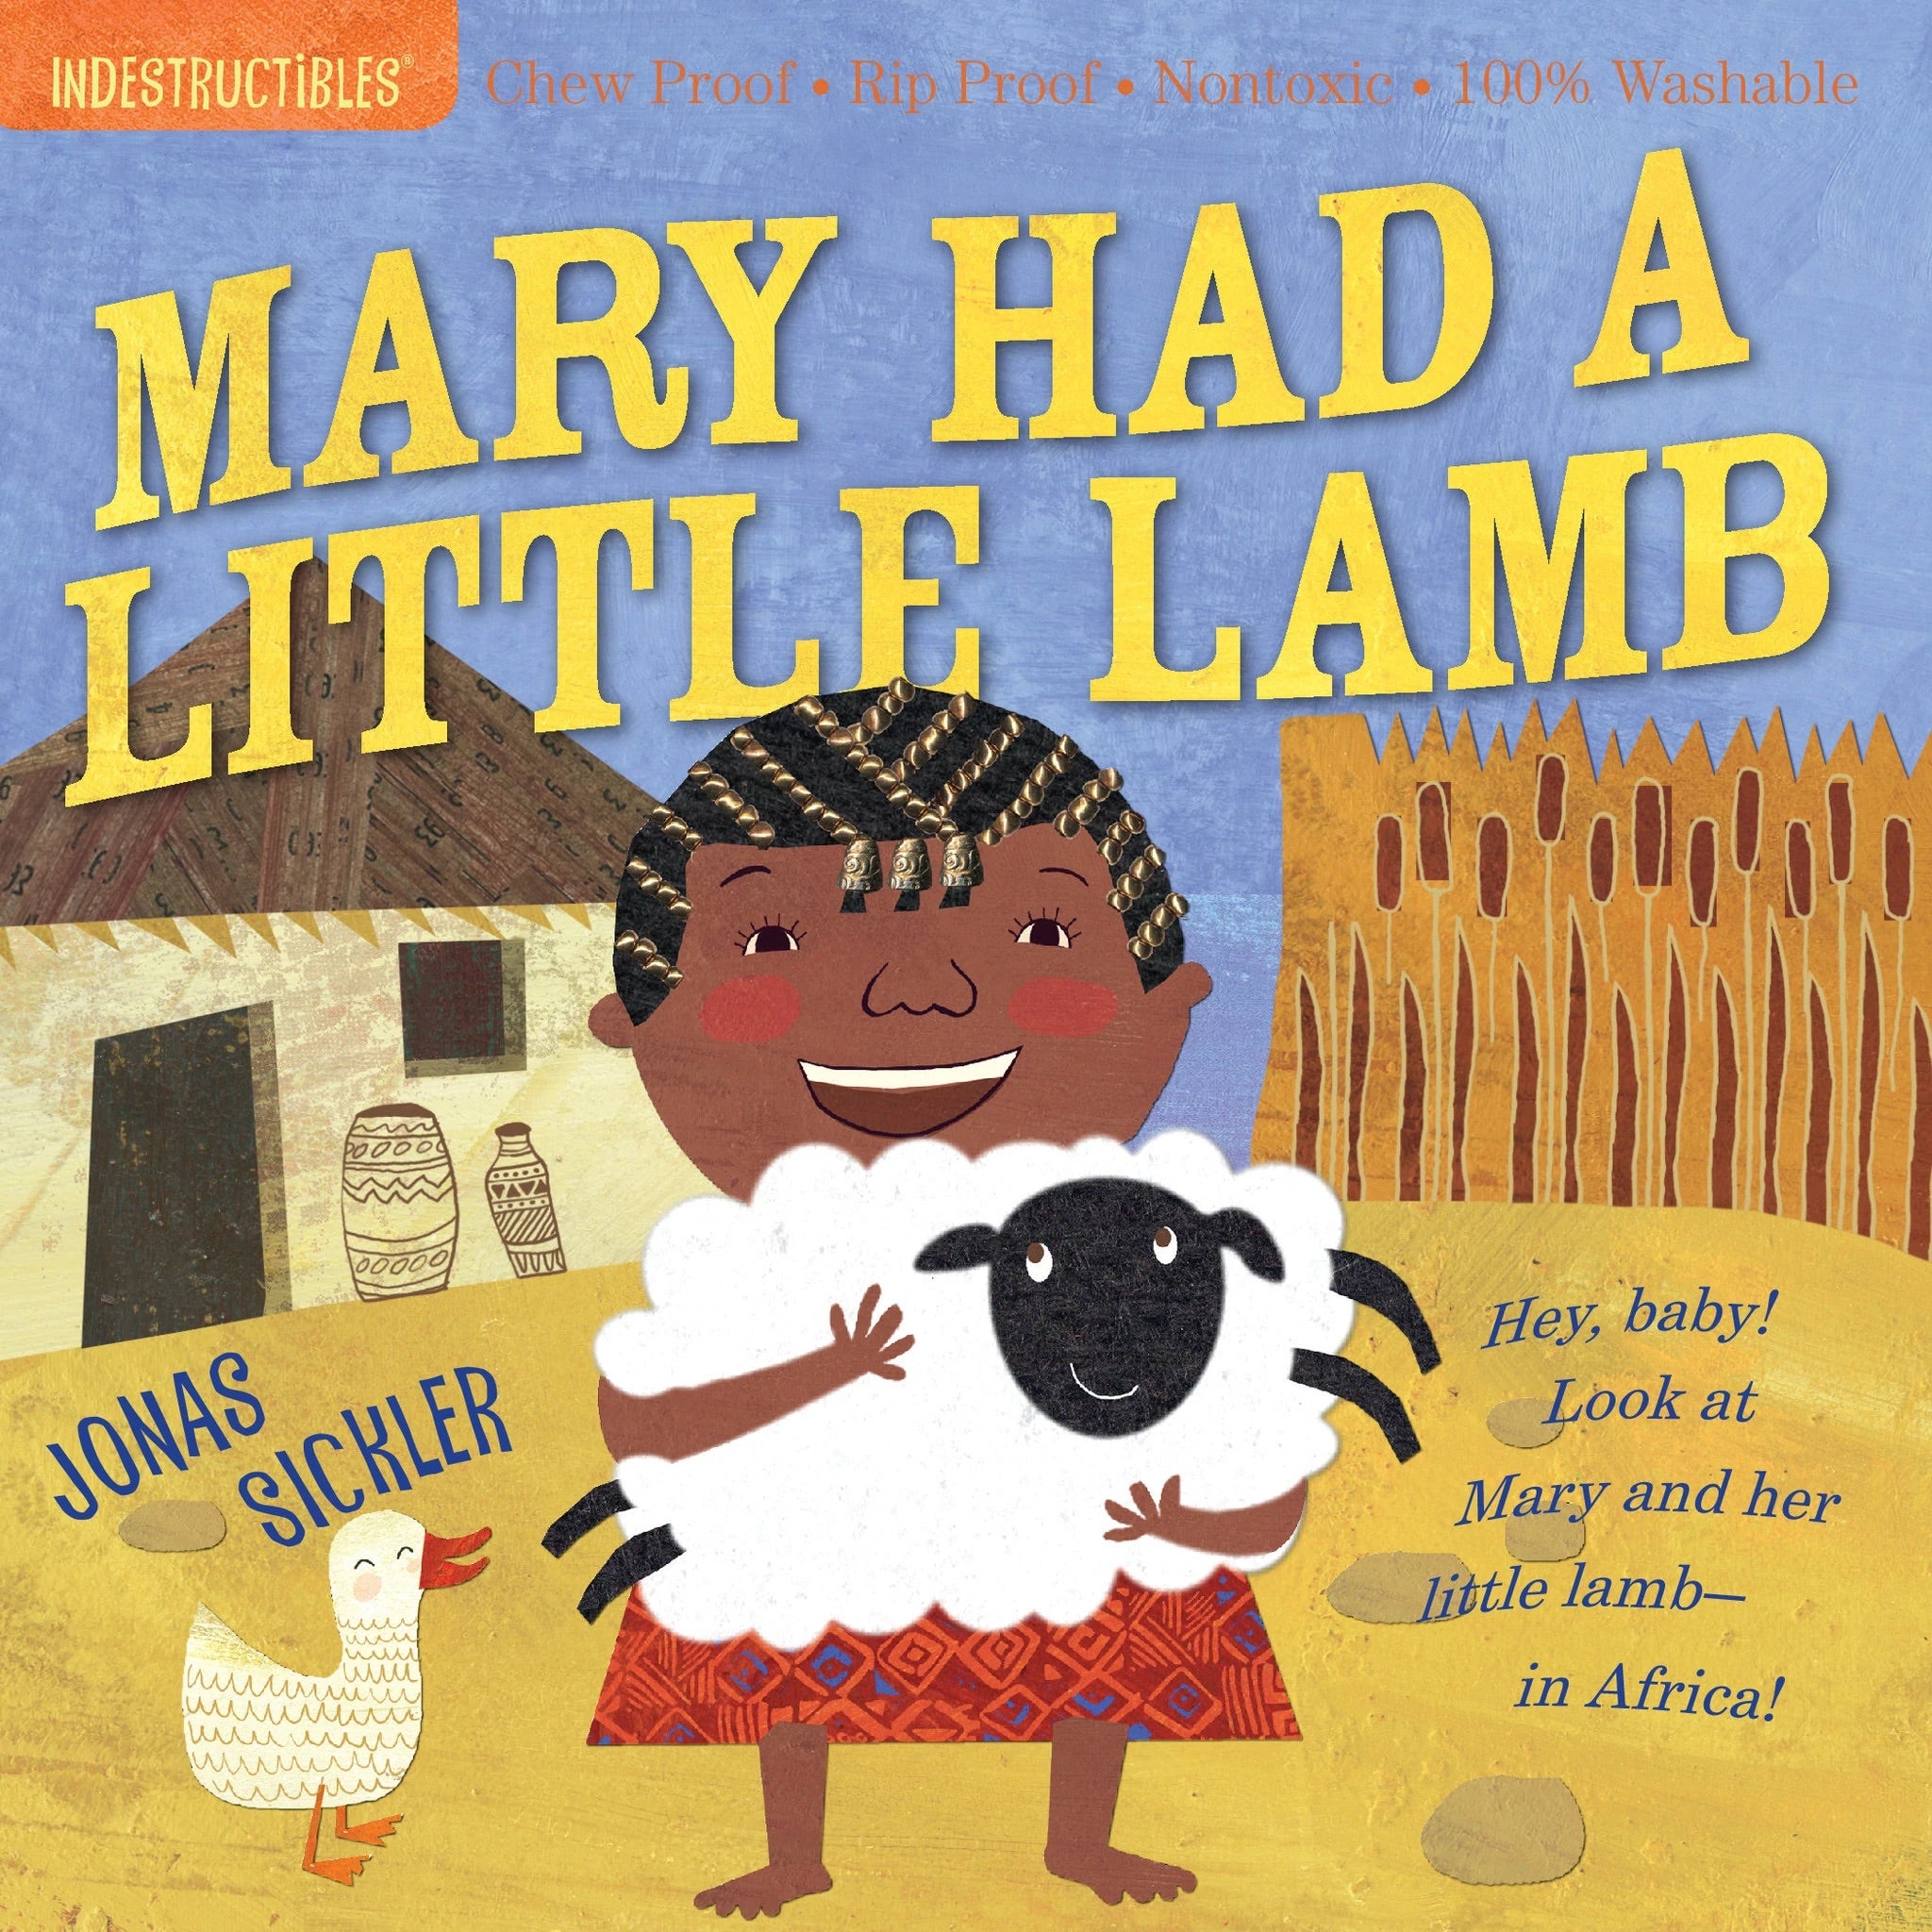 Indestructibles: Mary Had A Little Lamb by Jonas Sickler